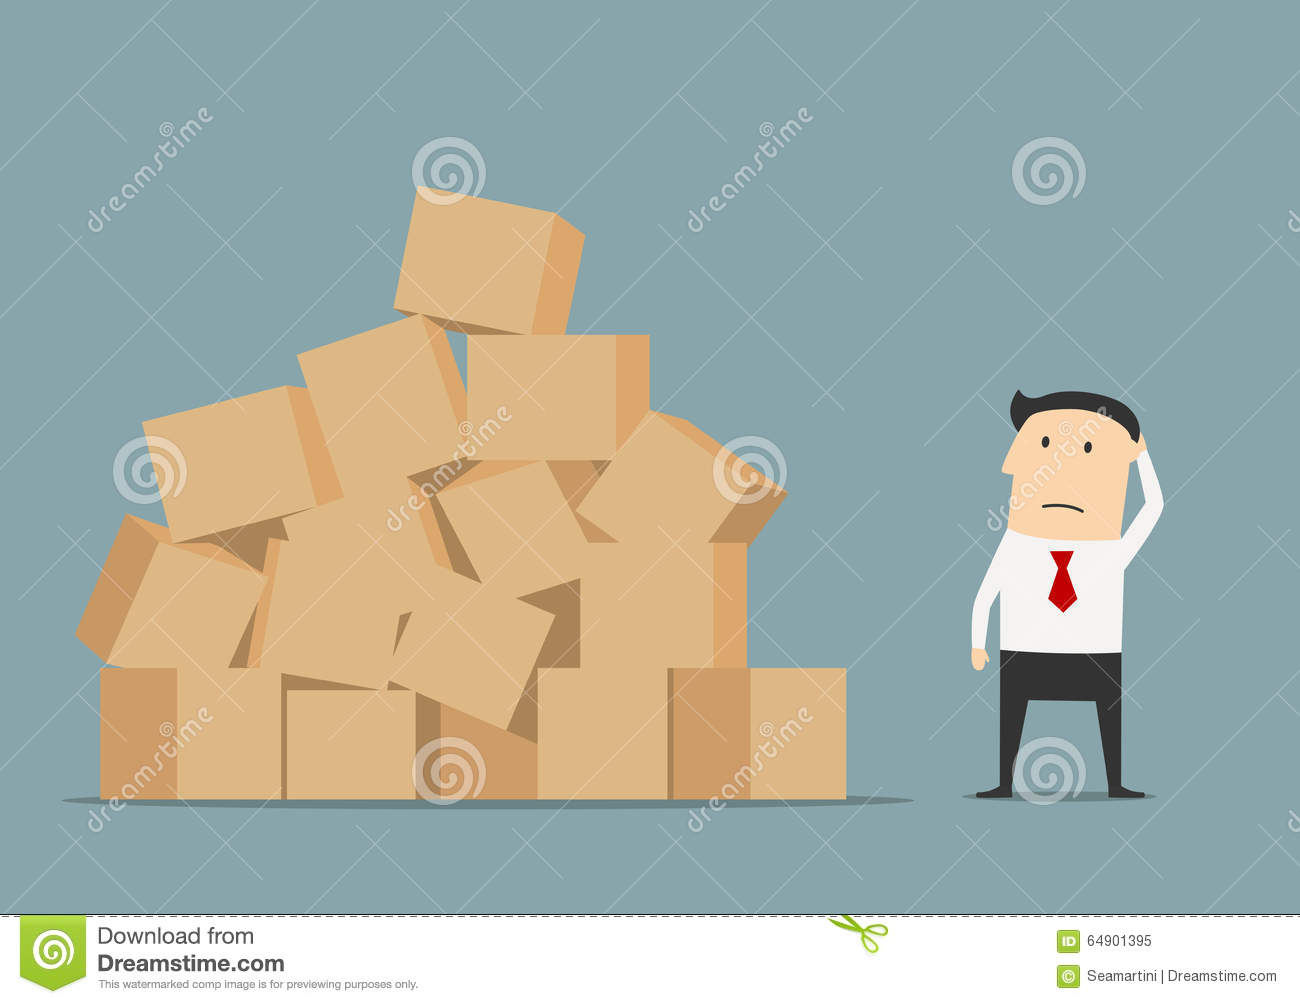 businessman-has-problem-delivery-storage-pensive-standing-near-huge-pile-cardboard-boxes-thinking-how-to-deliver-64901395.jpg